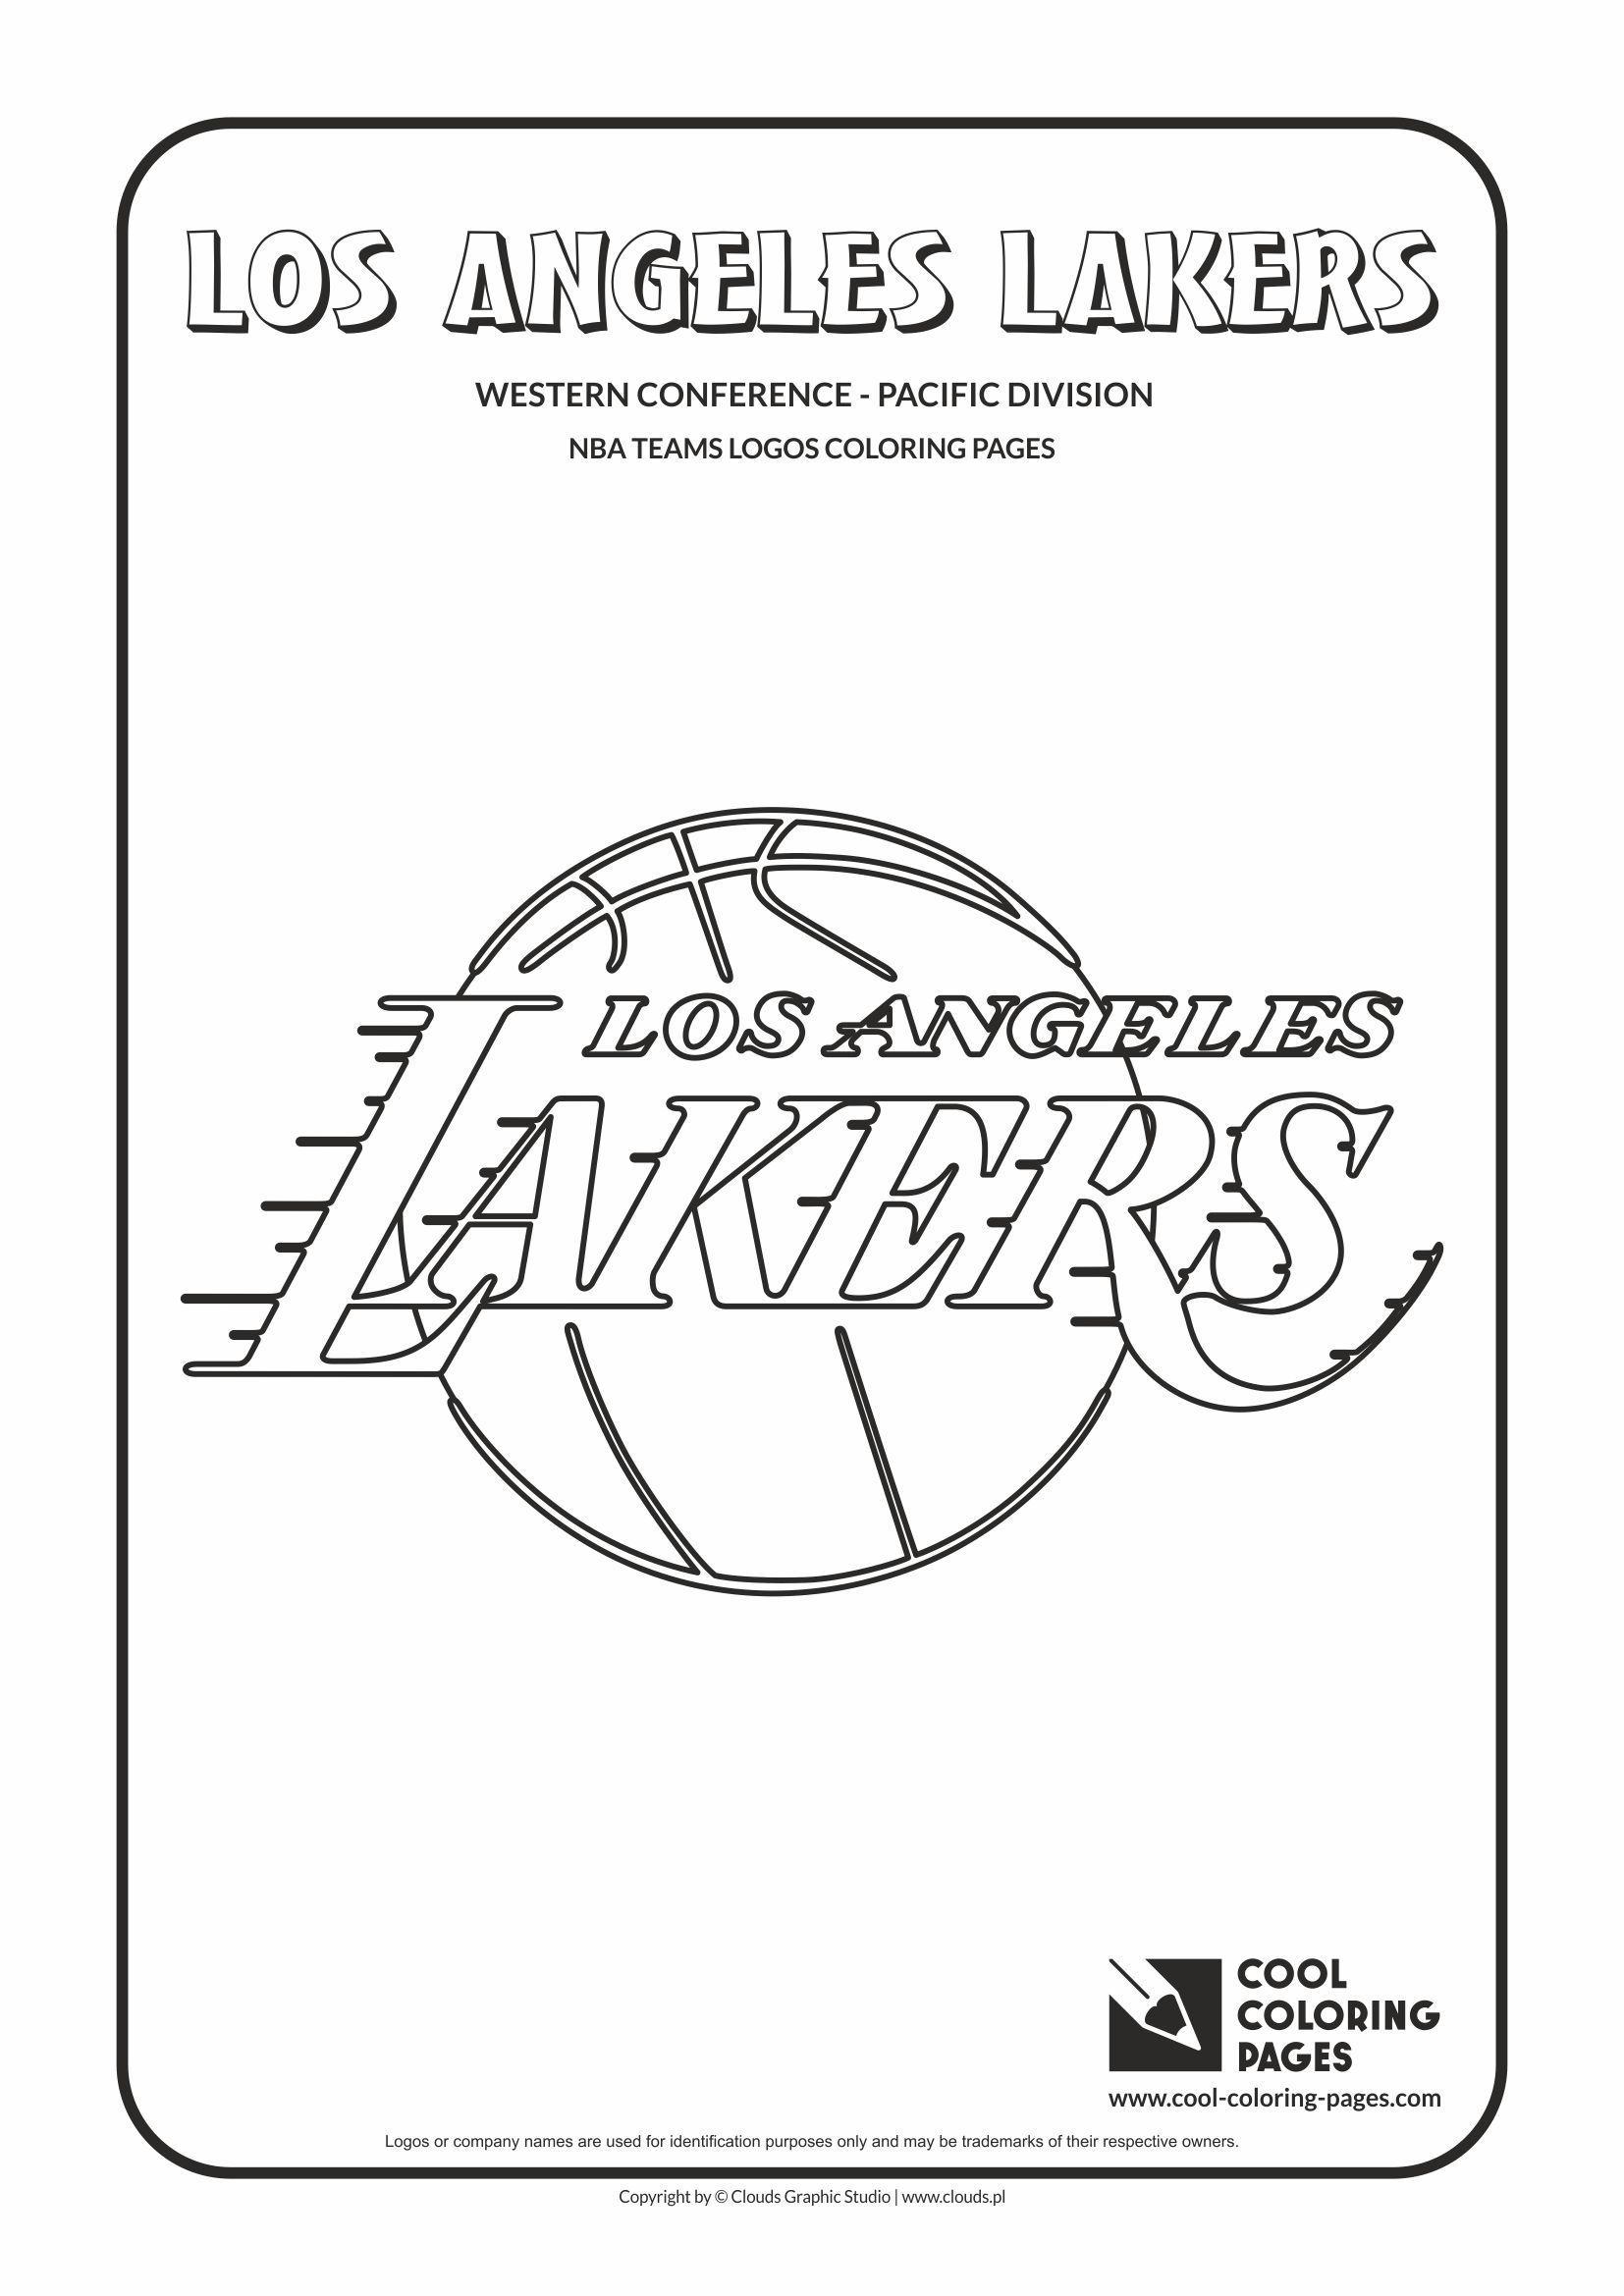 Cool NBA Team Logo - Cool Coloring Pages - NBA Basketball Clubs Logos - Western ...